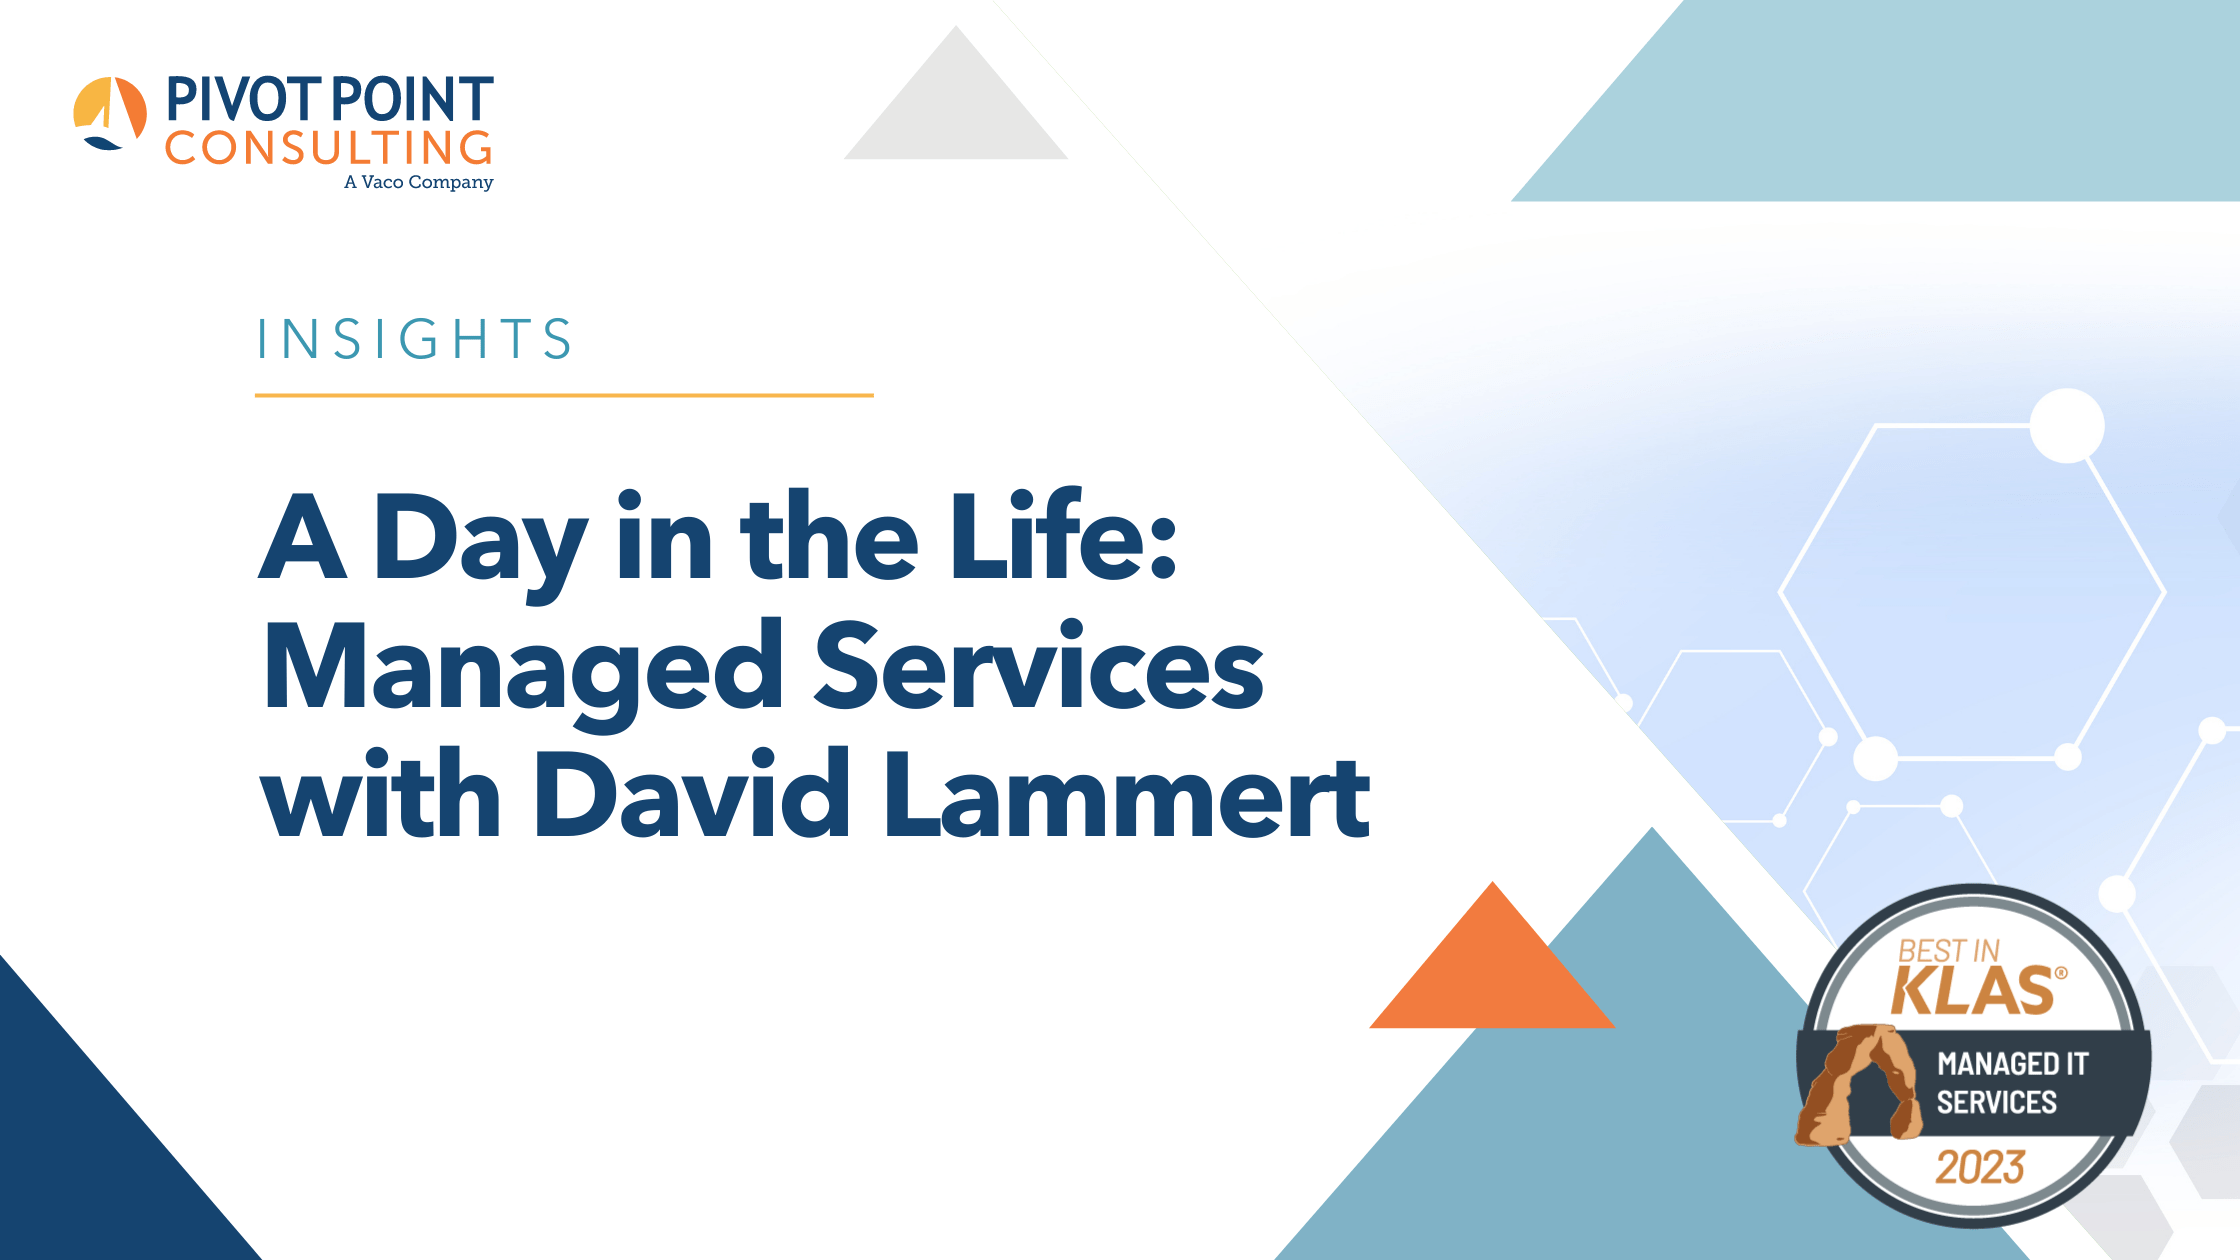 A Day in the Life: Managed Services with David Lammert